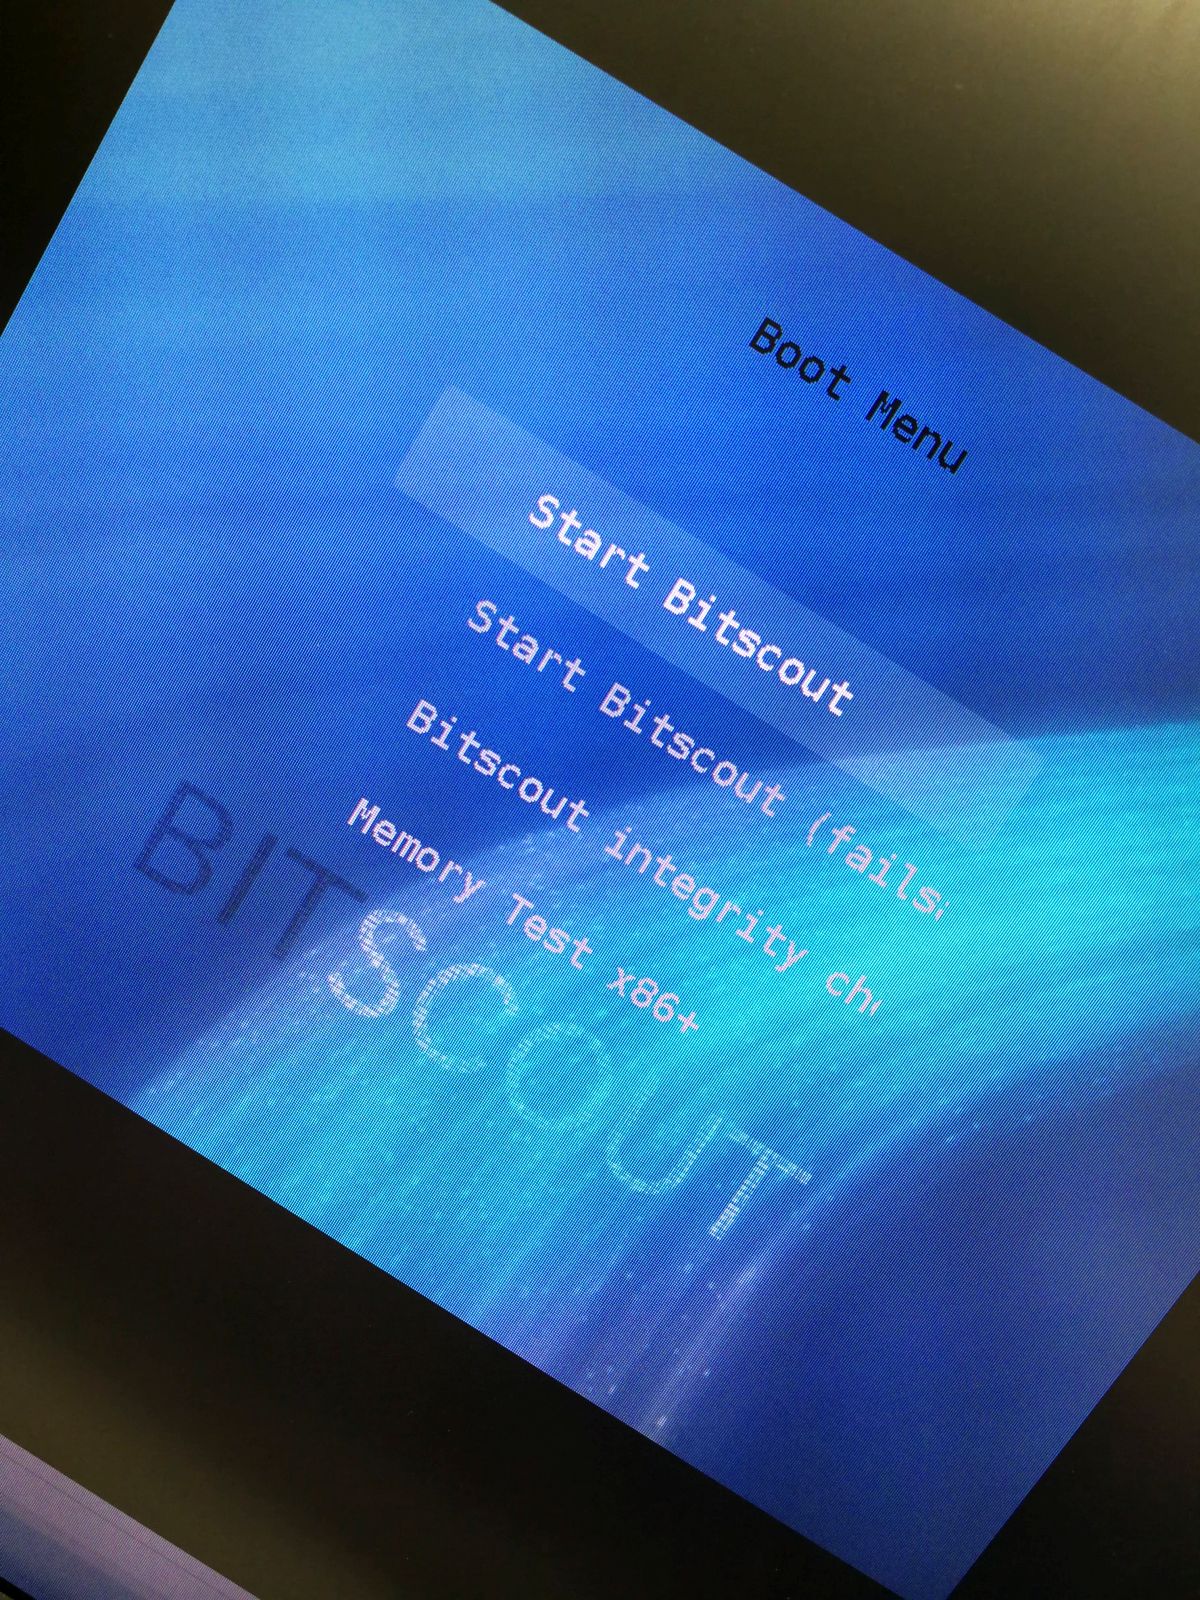 Bitscout